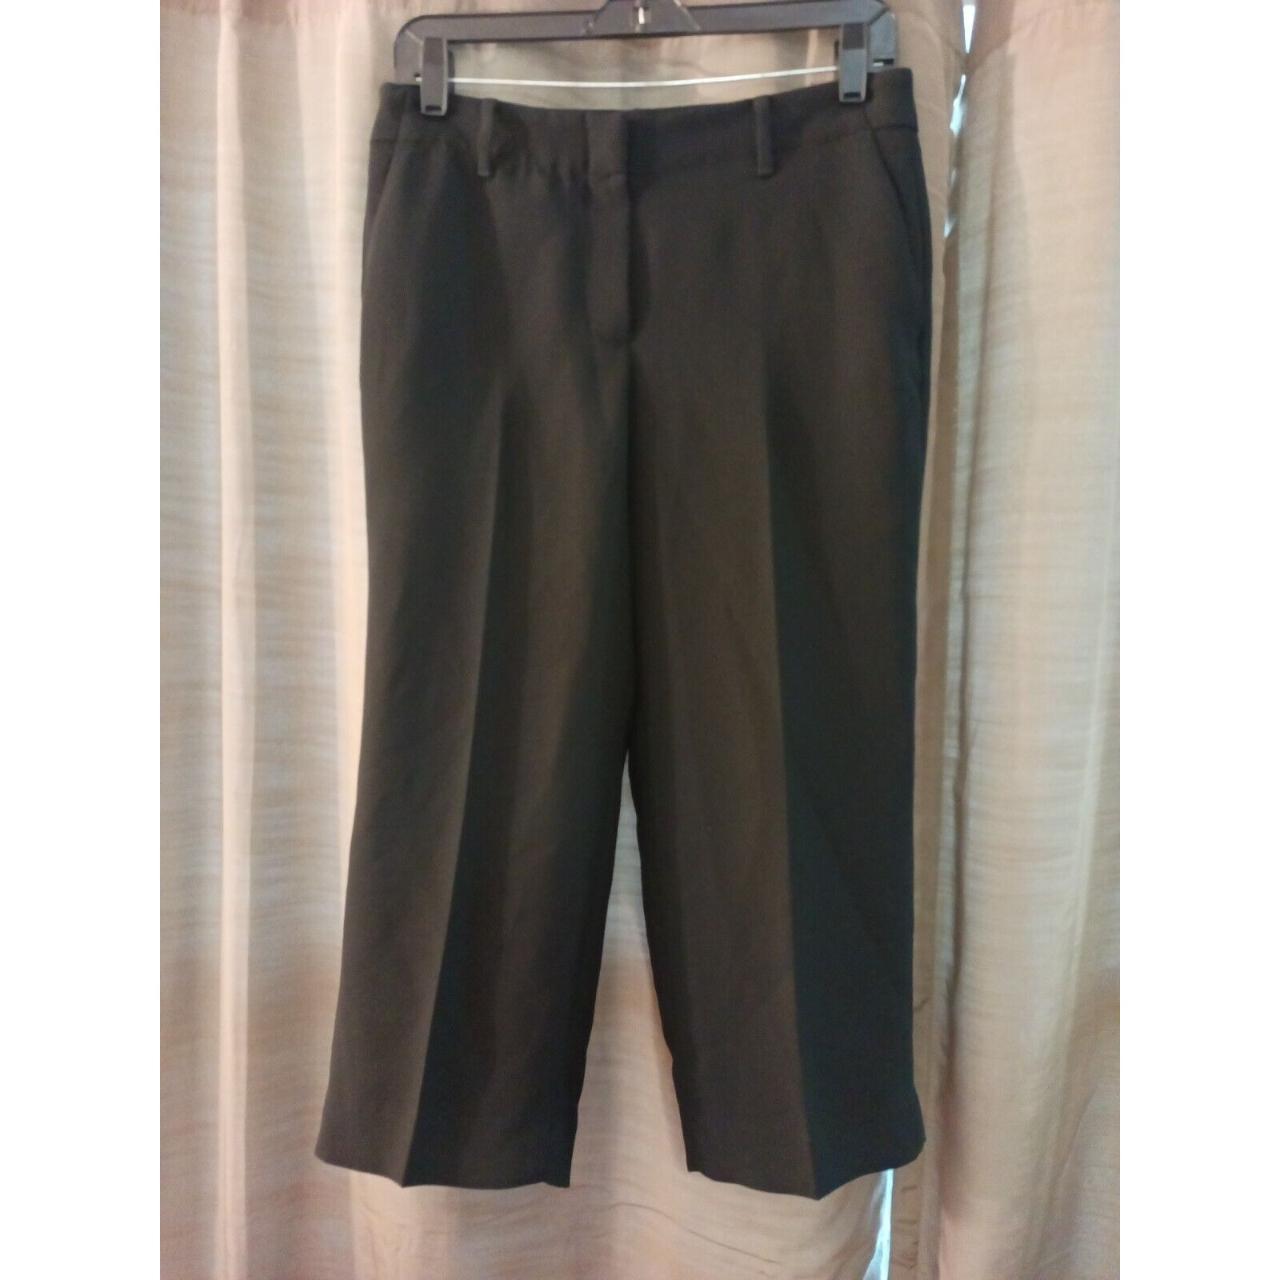 New with tags Women's Talbots Cropped Black Slacks... - Depop